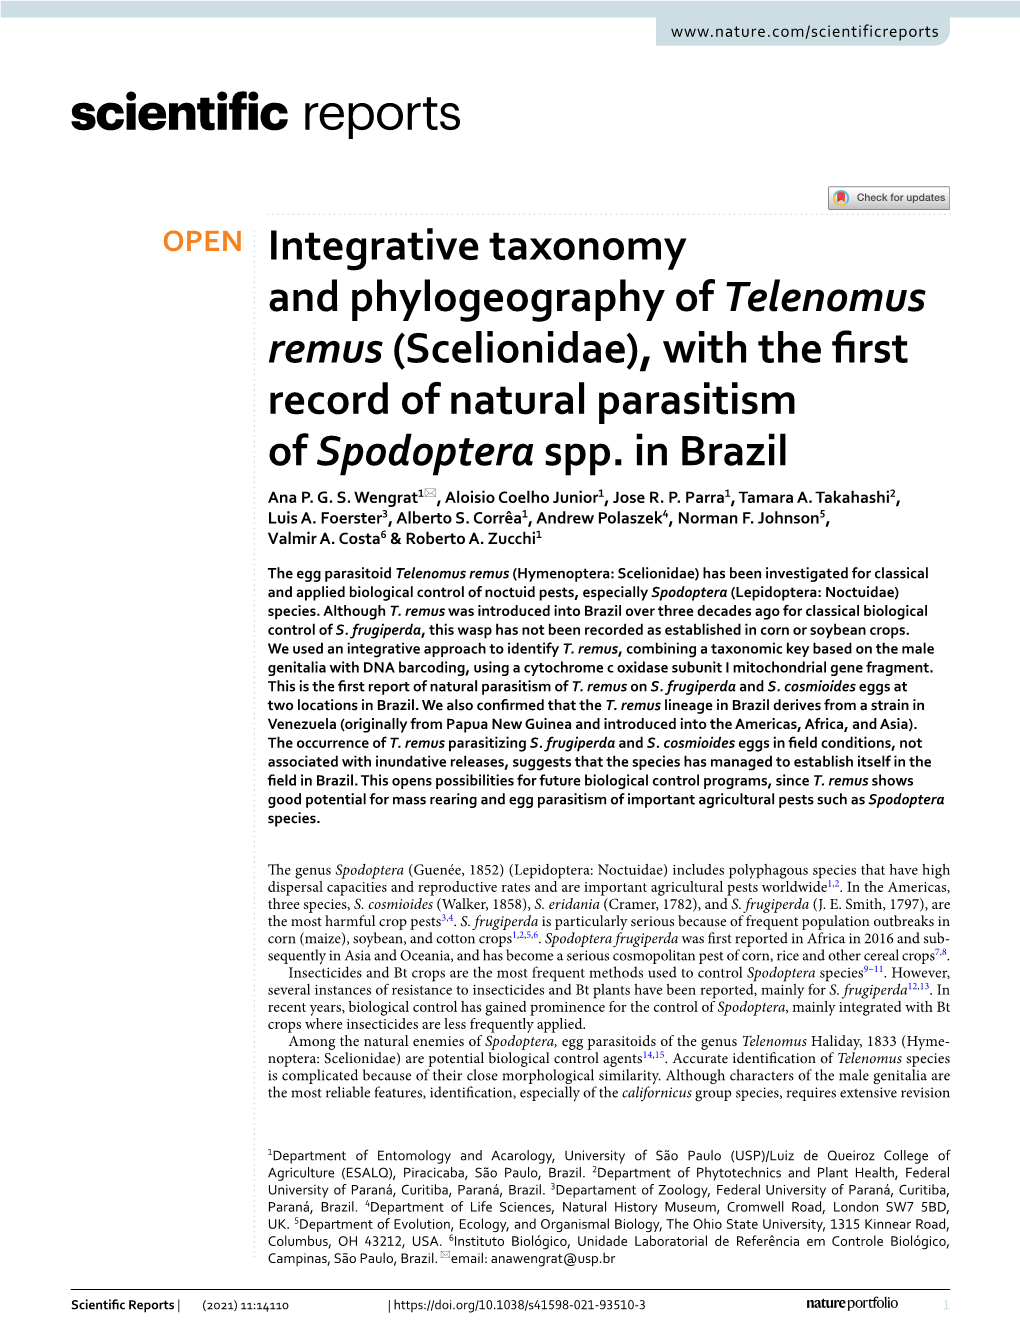 Integrative Taxonomy and Phylogeography of Telenomus Remus (Scelionidae), with the First Record of Natural Parasitism of Spodopt